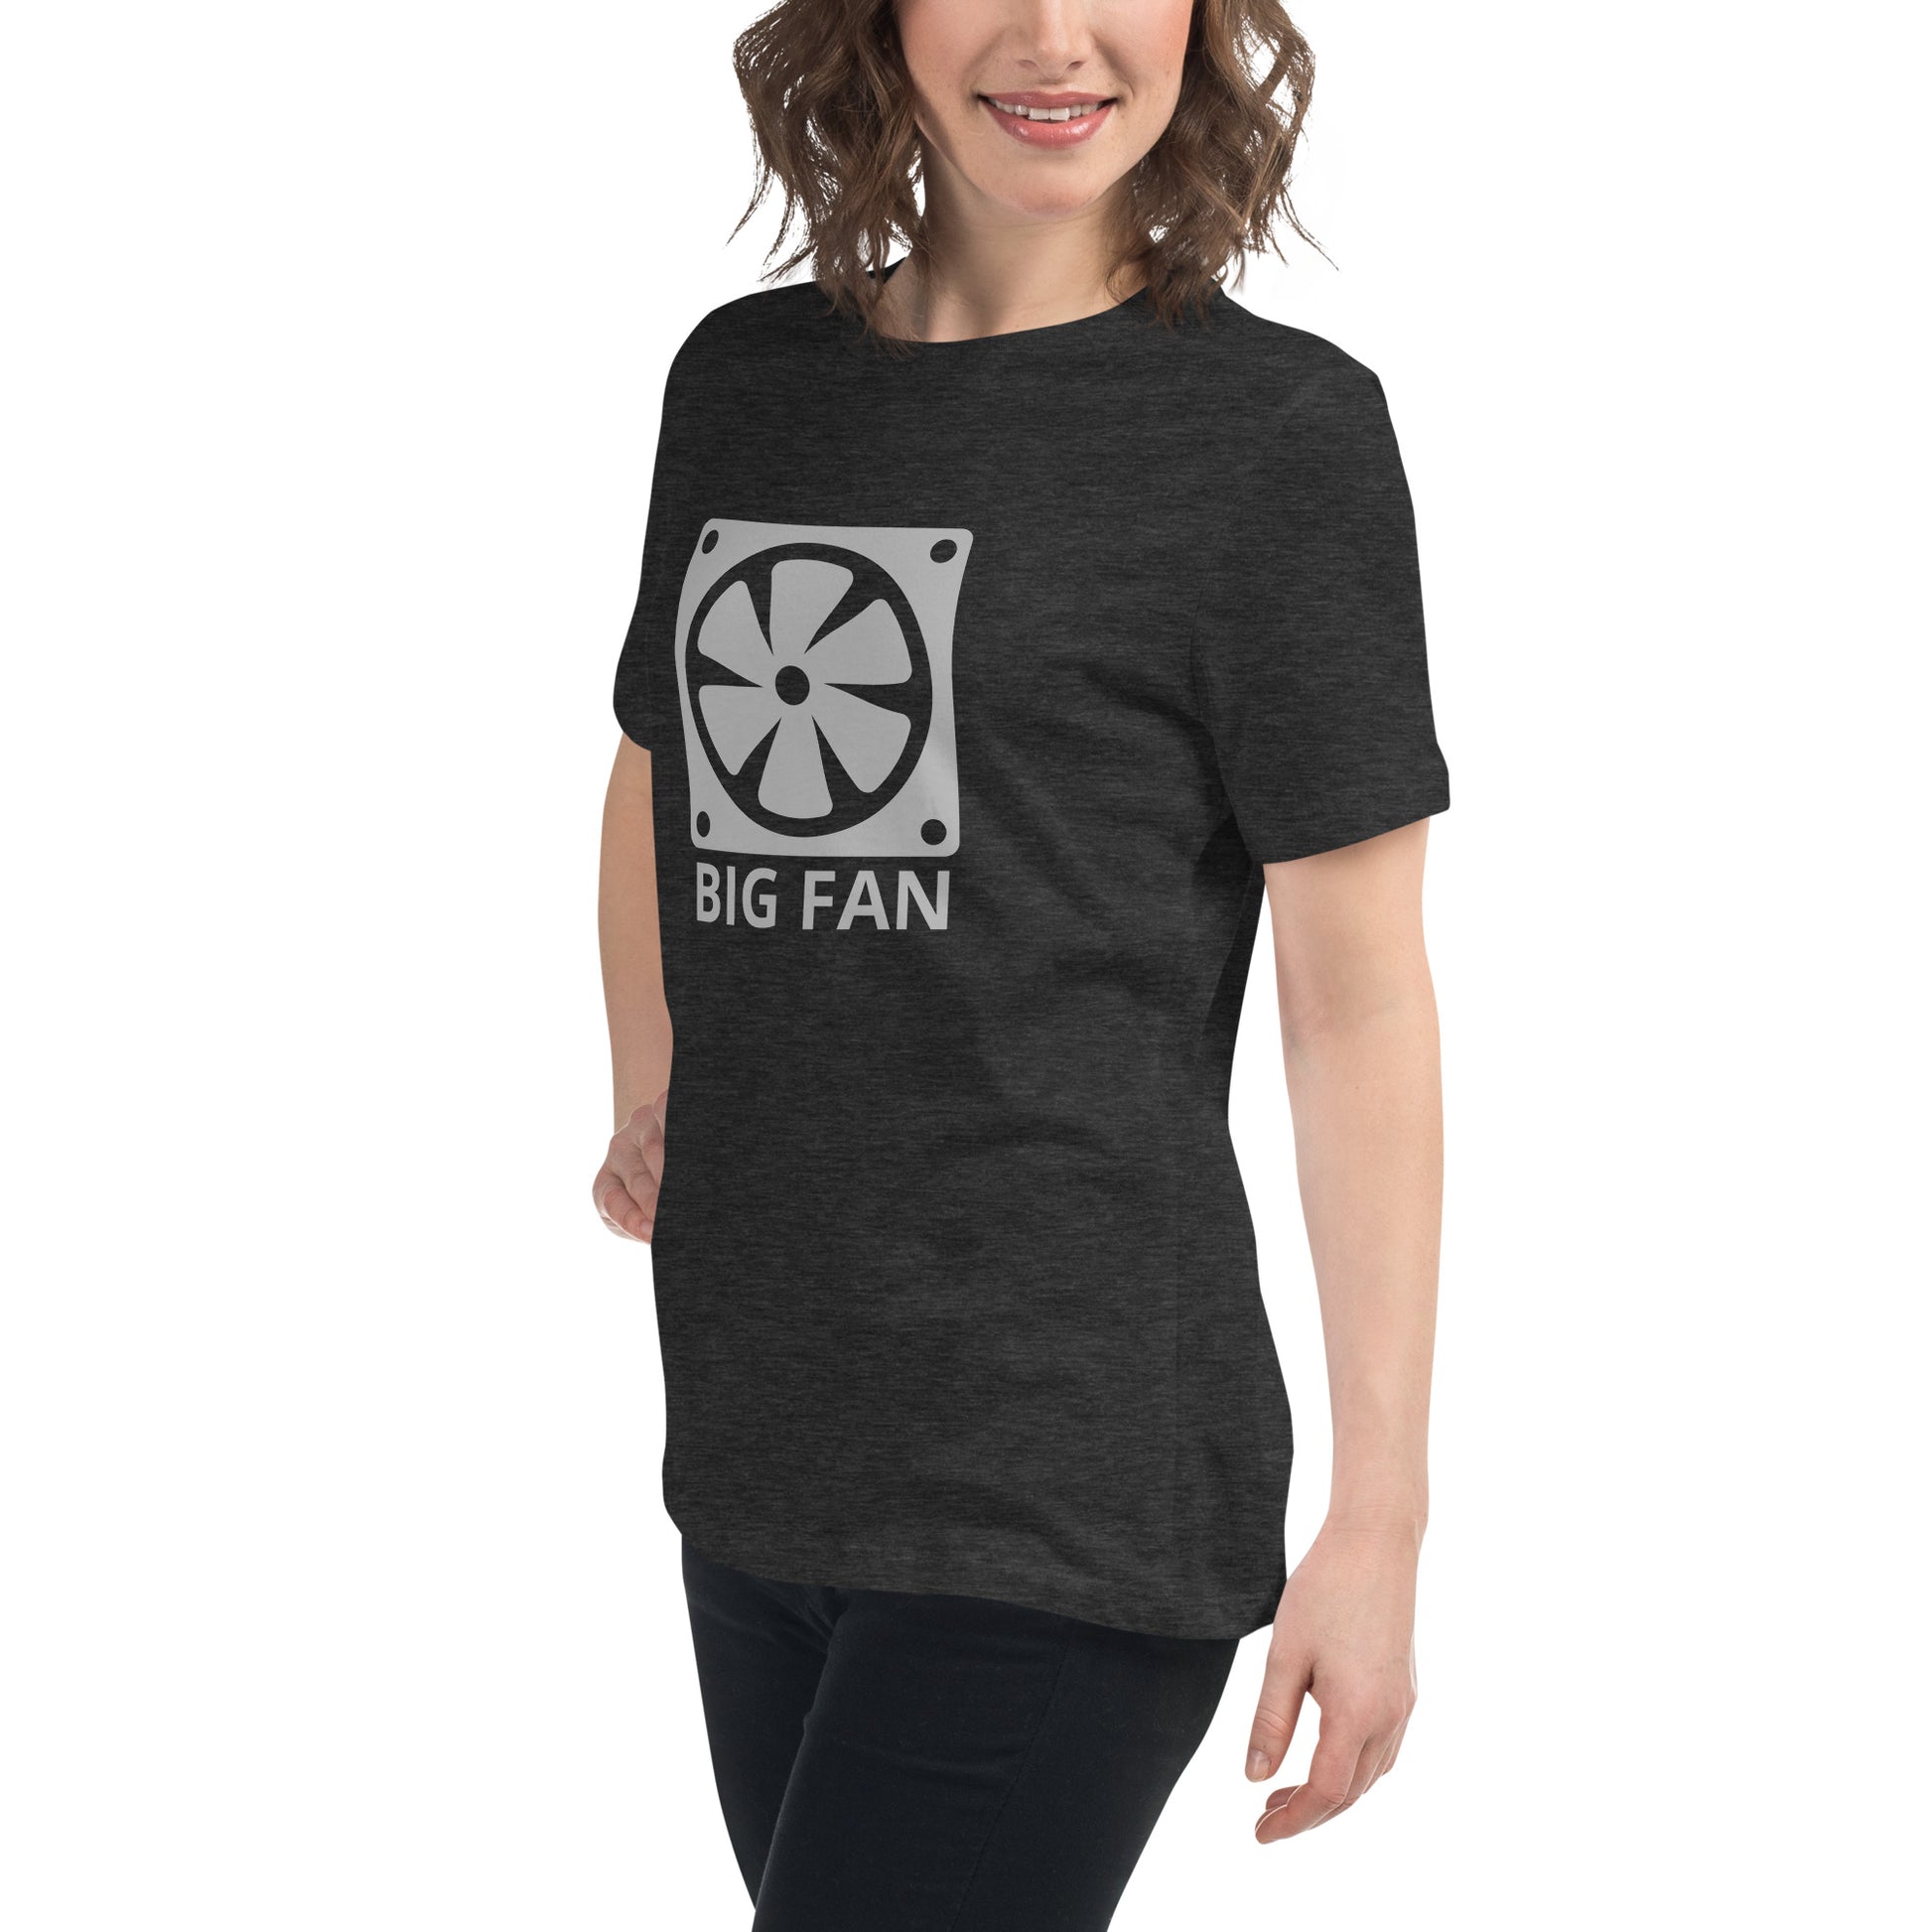 Women with dark grey t-shirt with image of a big computer fan and the text "BIG FAN"